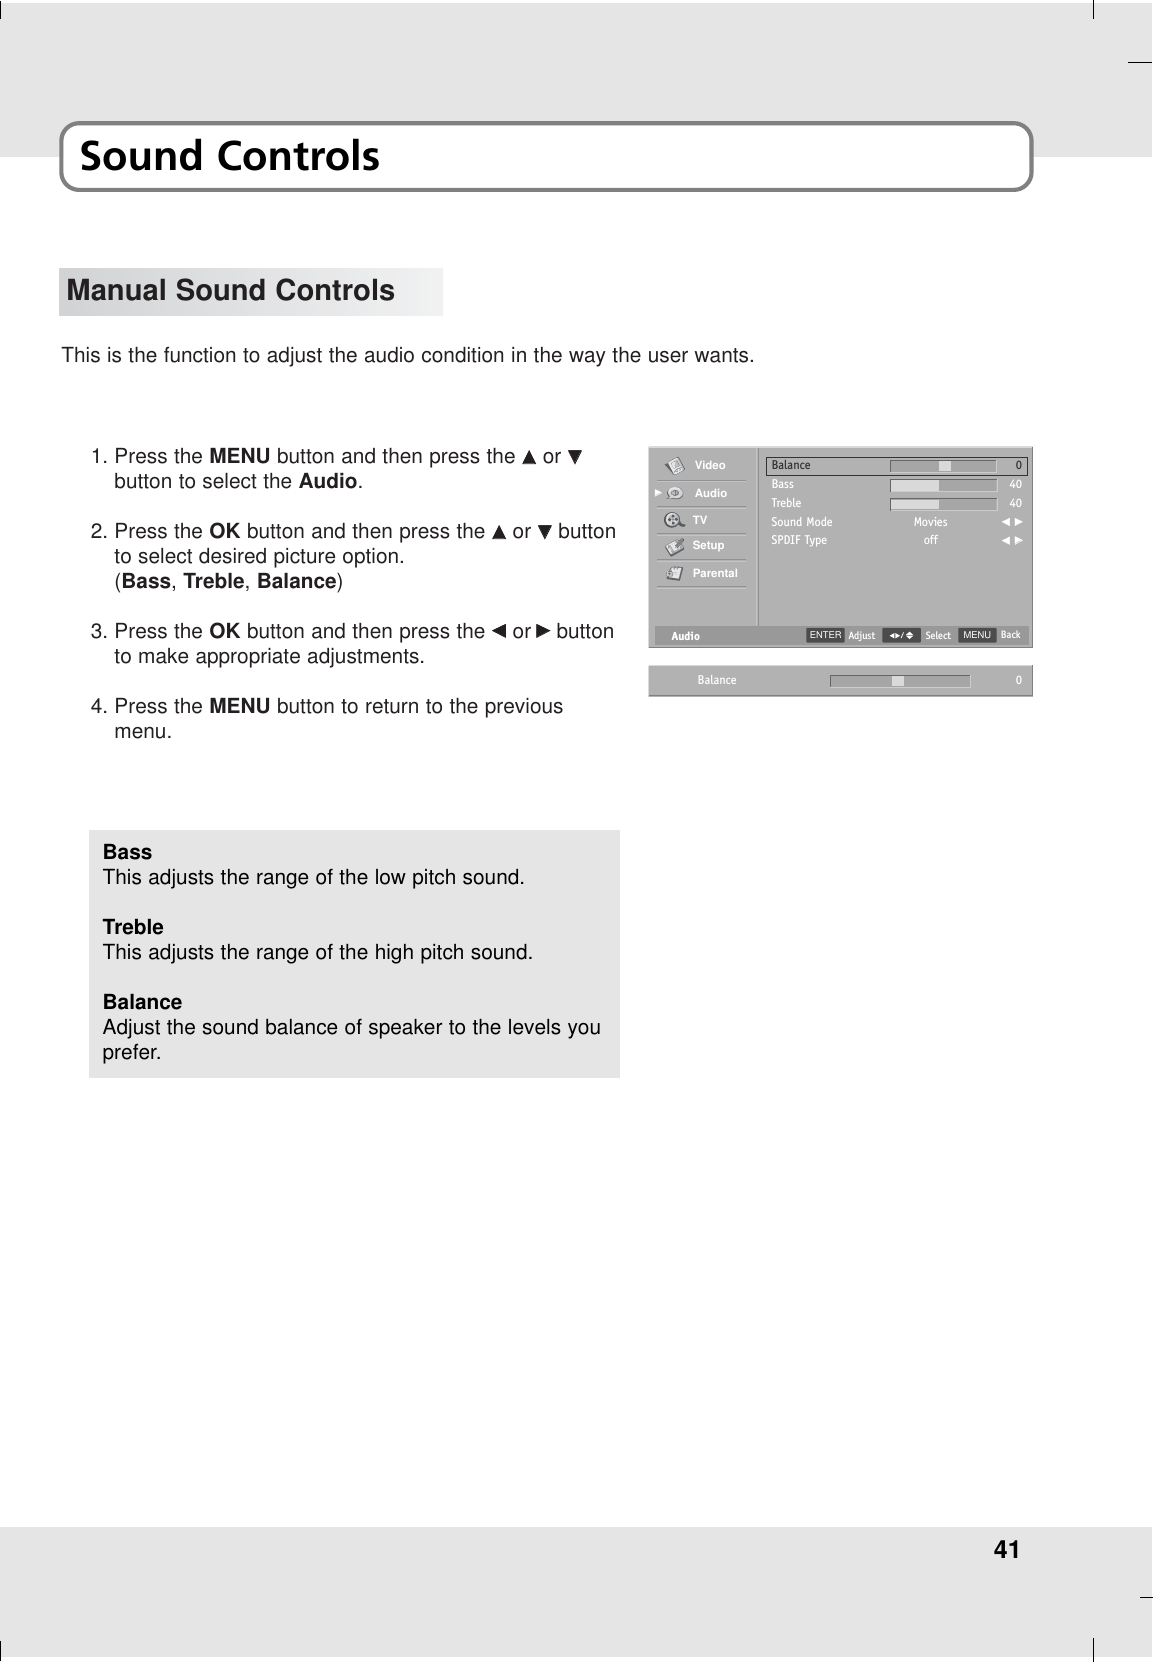 41Sound ControlsManual Sound ControlsThis is the function to adjust the audio condition in the way the user wants.1. Press the MENU button and then press the DDor EEbutton to select the Audio.2. Press the OK button and then press the DDor EEbuttonto select desired picture option.(Bass, Treble, Balance) 3. Press the OK button and then press the FFor GGbuttonto make appropriate adjustments.4. Press the MENU button to return to the previousmenu.BassThis adjusts the range of the low pitch sound.TrebleThis adjusts the range of the high pitch sound.BalanceAdjust the sound balance of speaker to the levels youprefer.AudioBalanceBassTrebleSound ModeSPDIF TypeMoviesoff04040F GGF GGVideoAudioTVSetupParentalGGMENU BackSelectENTER AdjustBalance 0